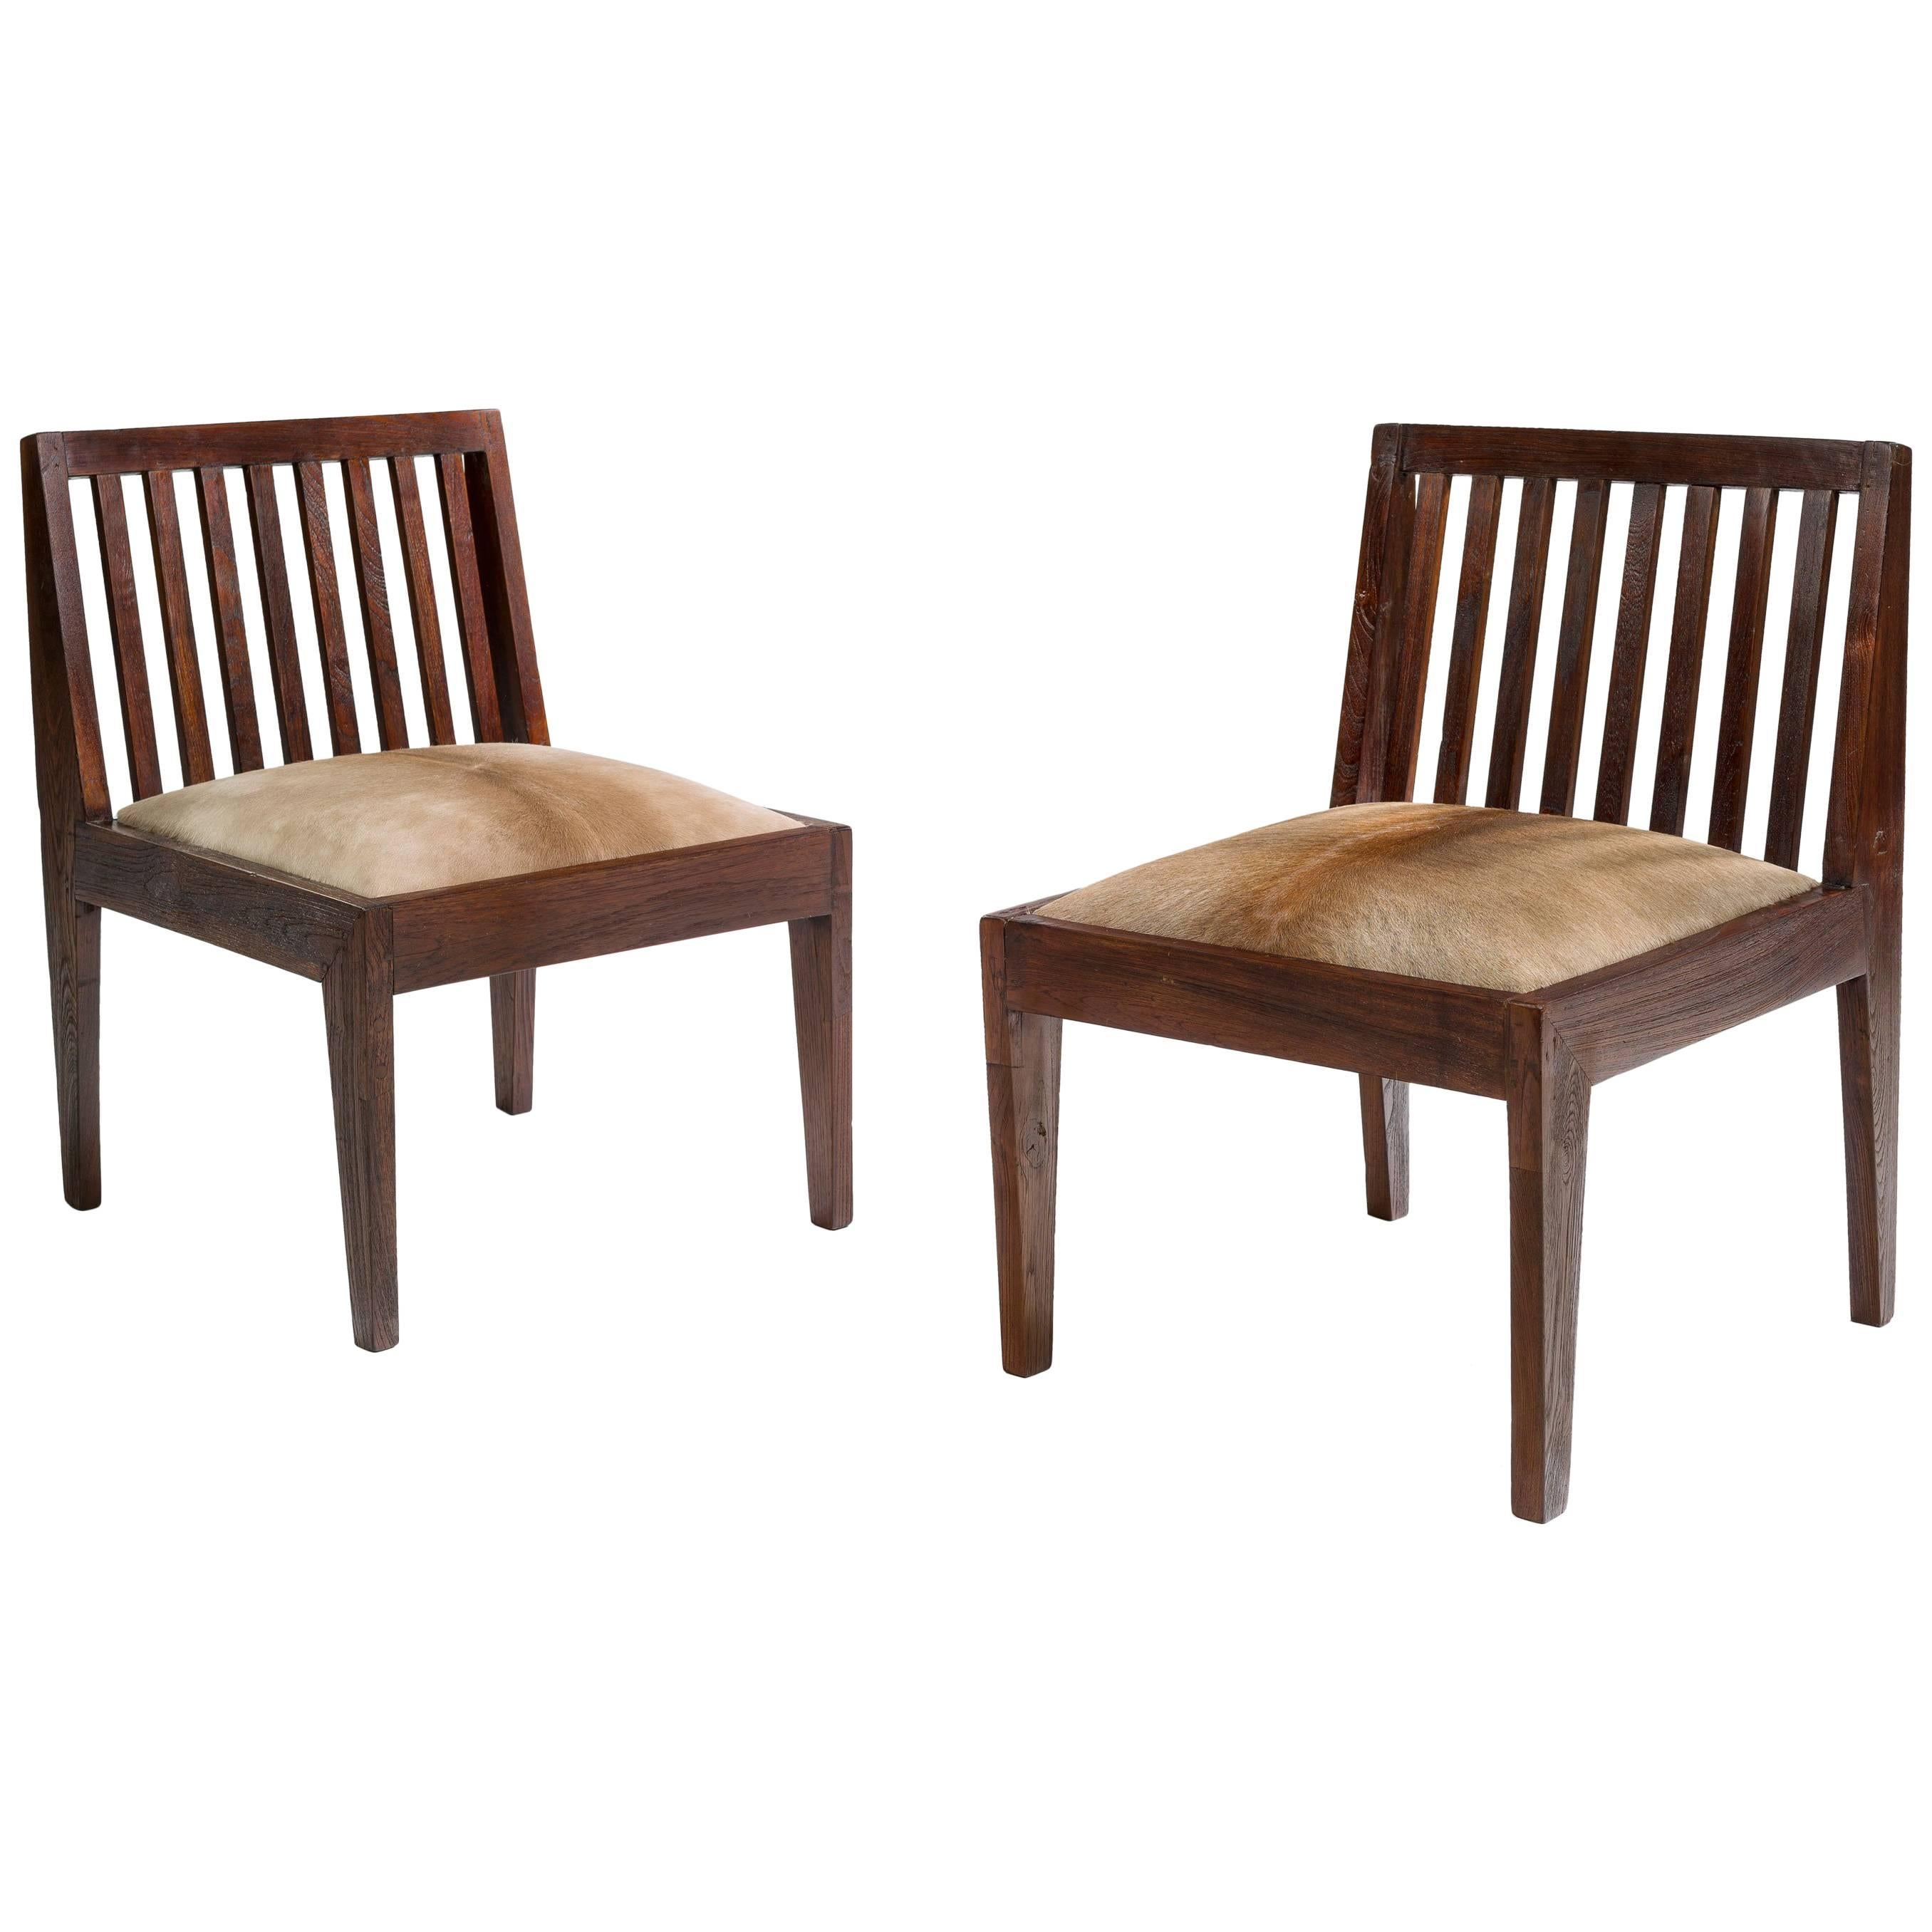 Pierre Jeanneret, Chauffeuses Pair